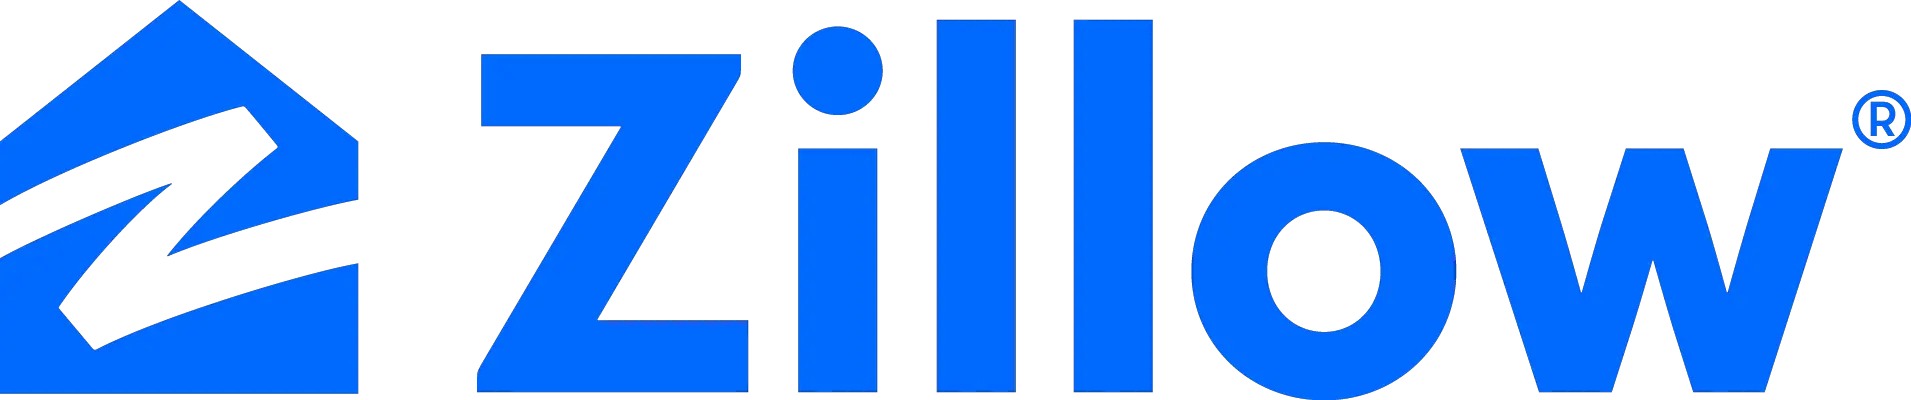 Zillow Rental Manager logo